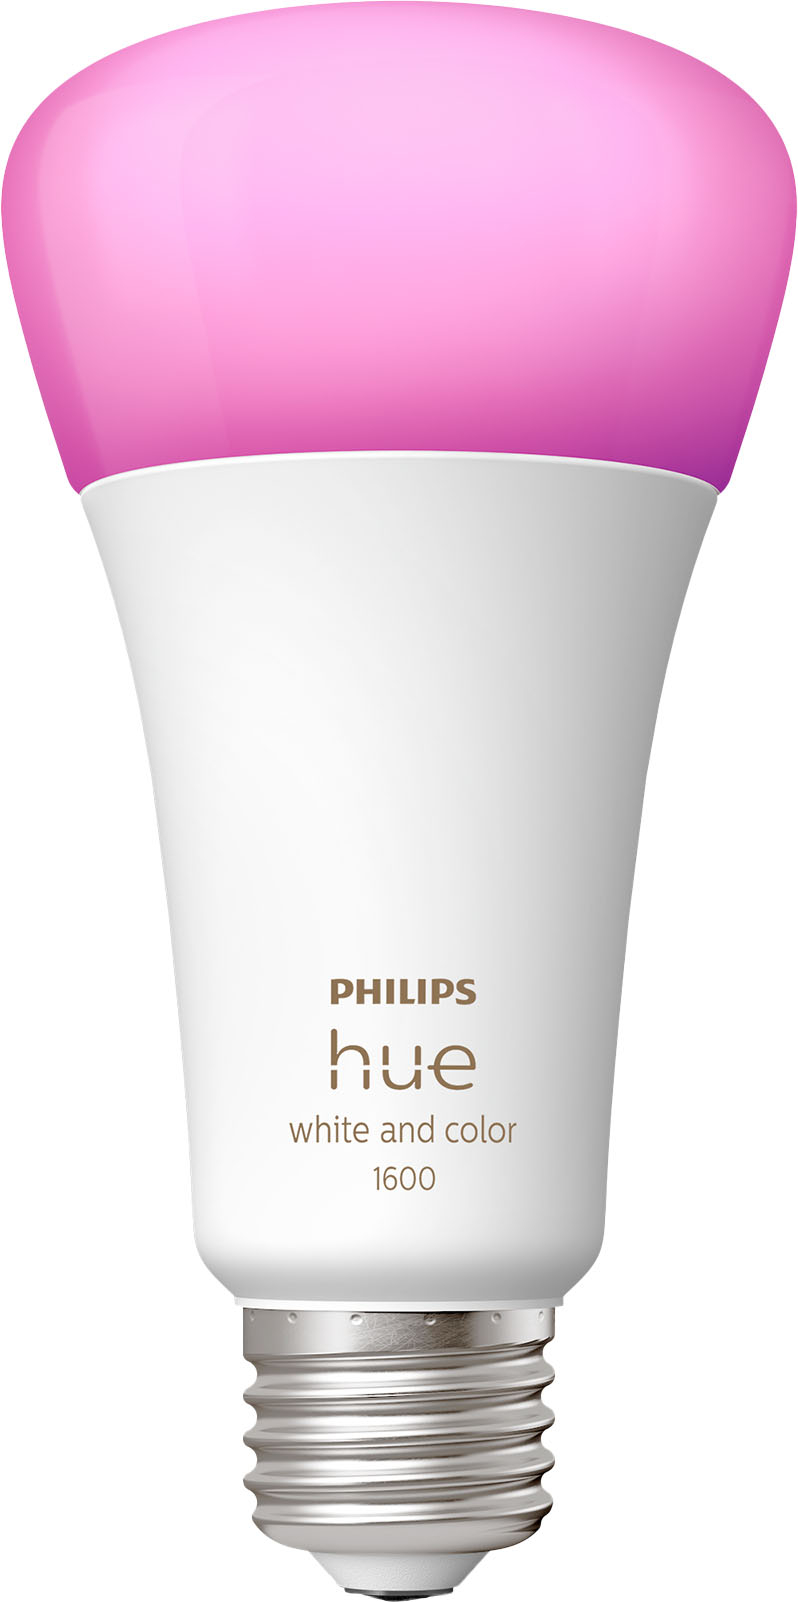 Philips Hue A21 Bluetooth 100W Smart LED Bulb White and Color Ambiance ...